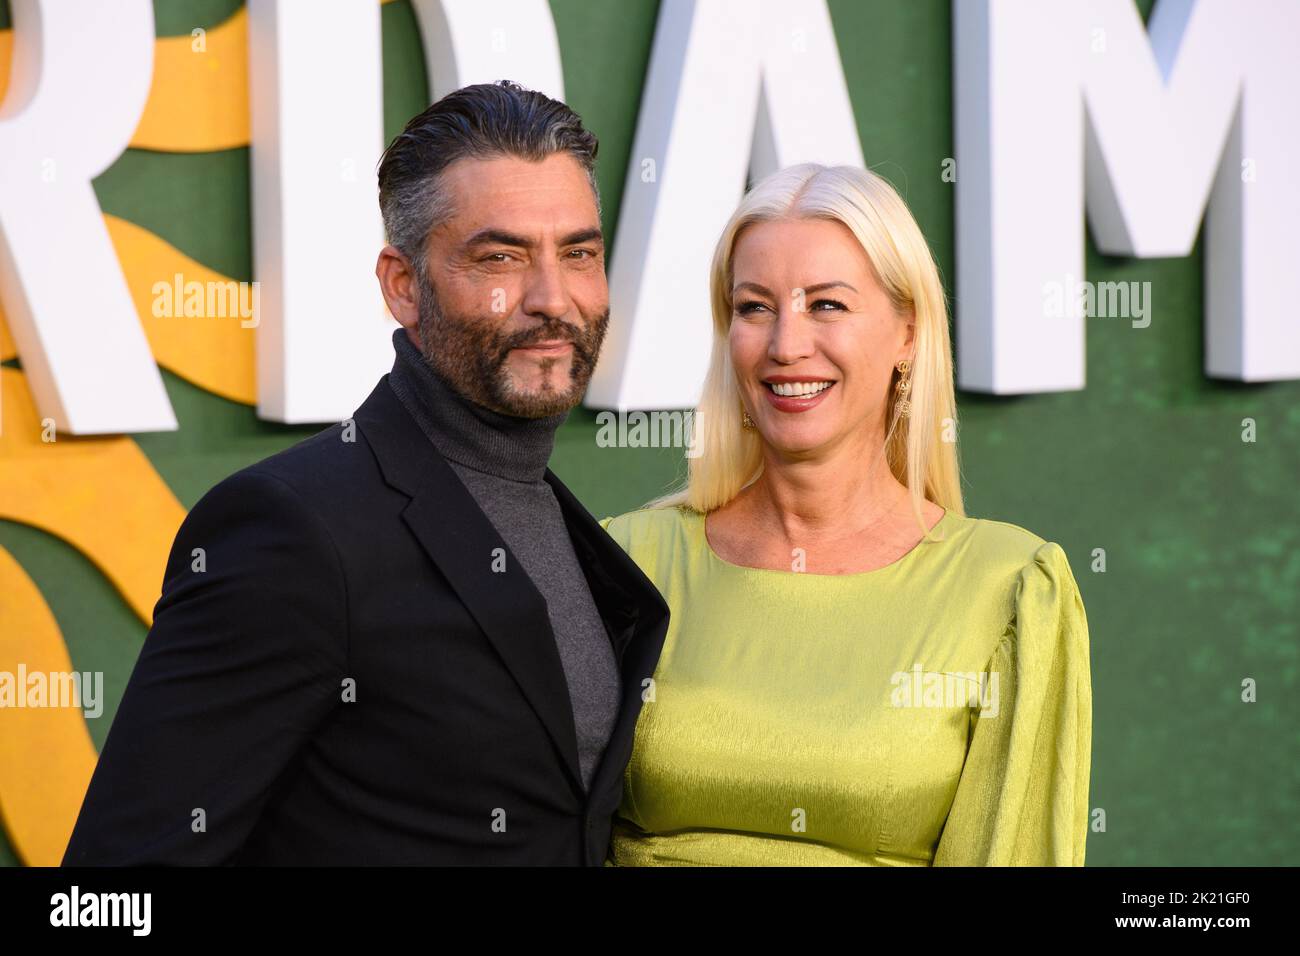 London, UK. 22 September 2022. Denise van Outen and Jimmy Barba attending the European premiere of Amsterdam at the Odeon Luxe Leicester Square Cinema, London Picture date: Thursday September 22, 2022. Photo credit should read: Matt Crossick/Empics/Alamy Live News Stock Photo